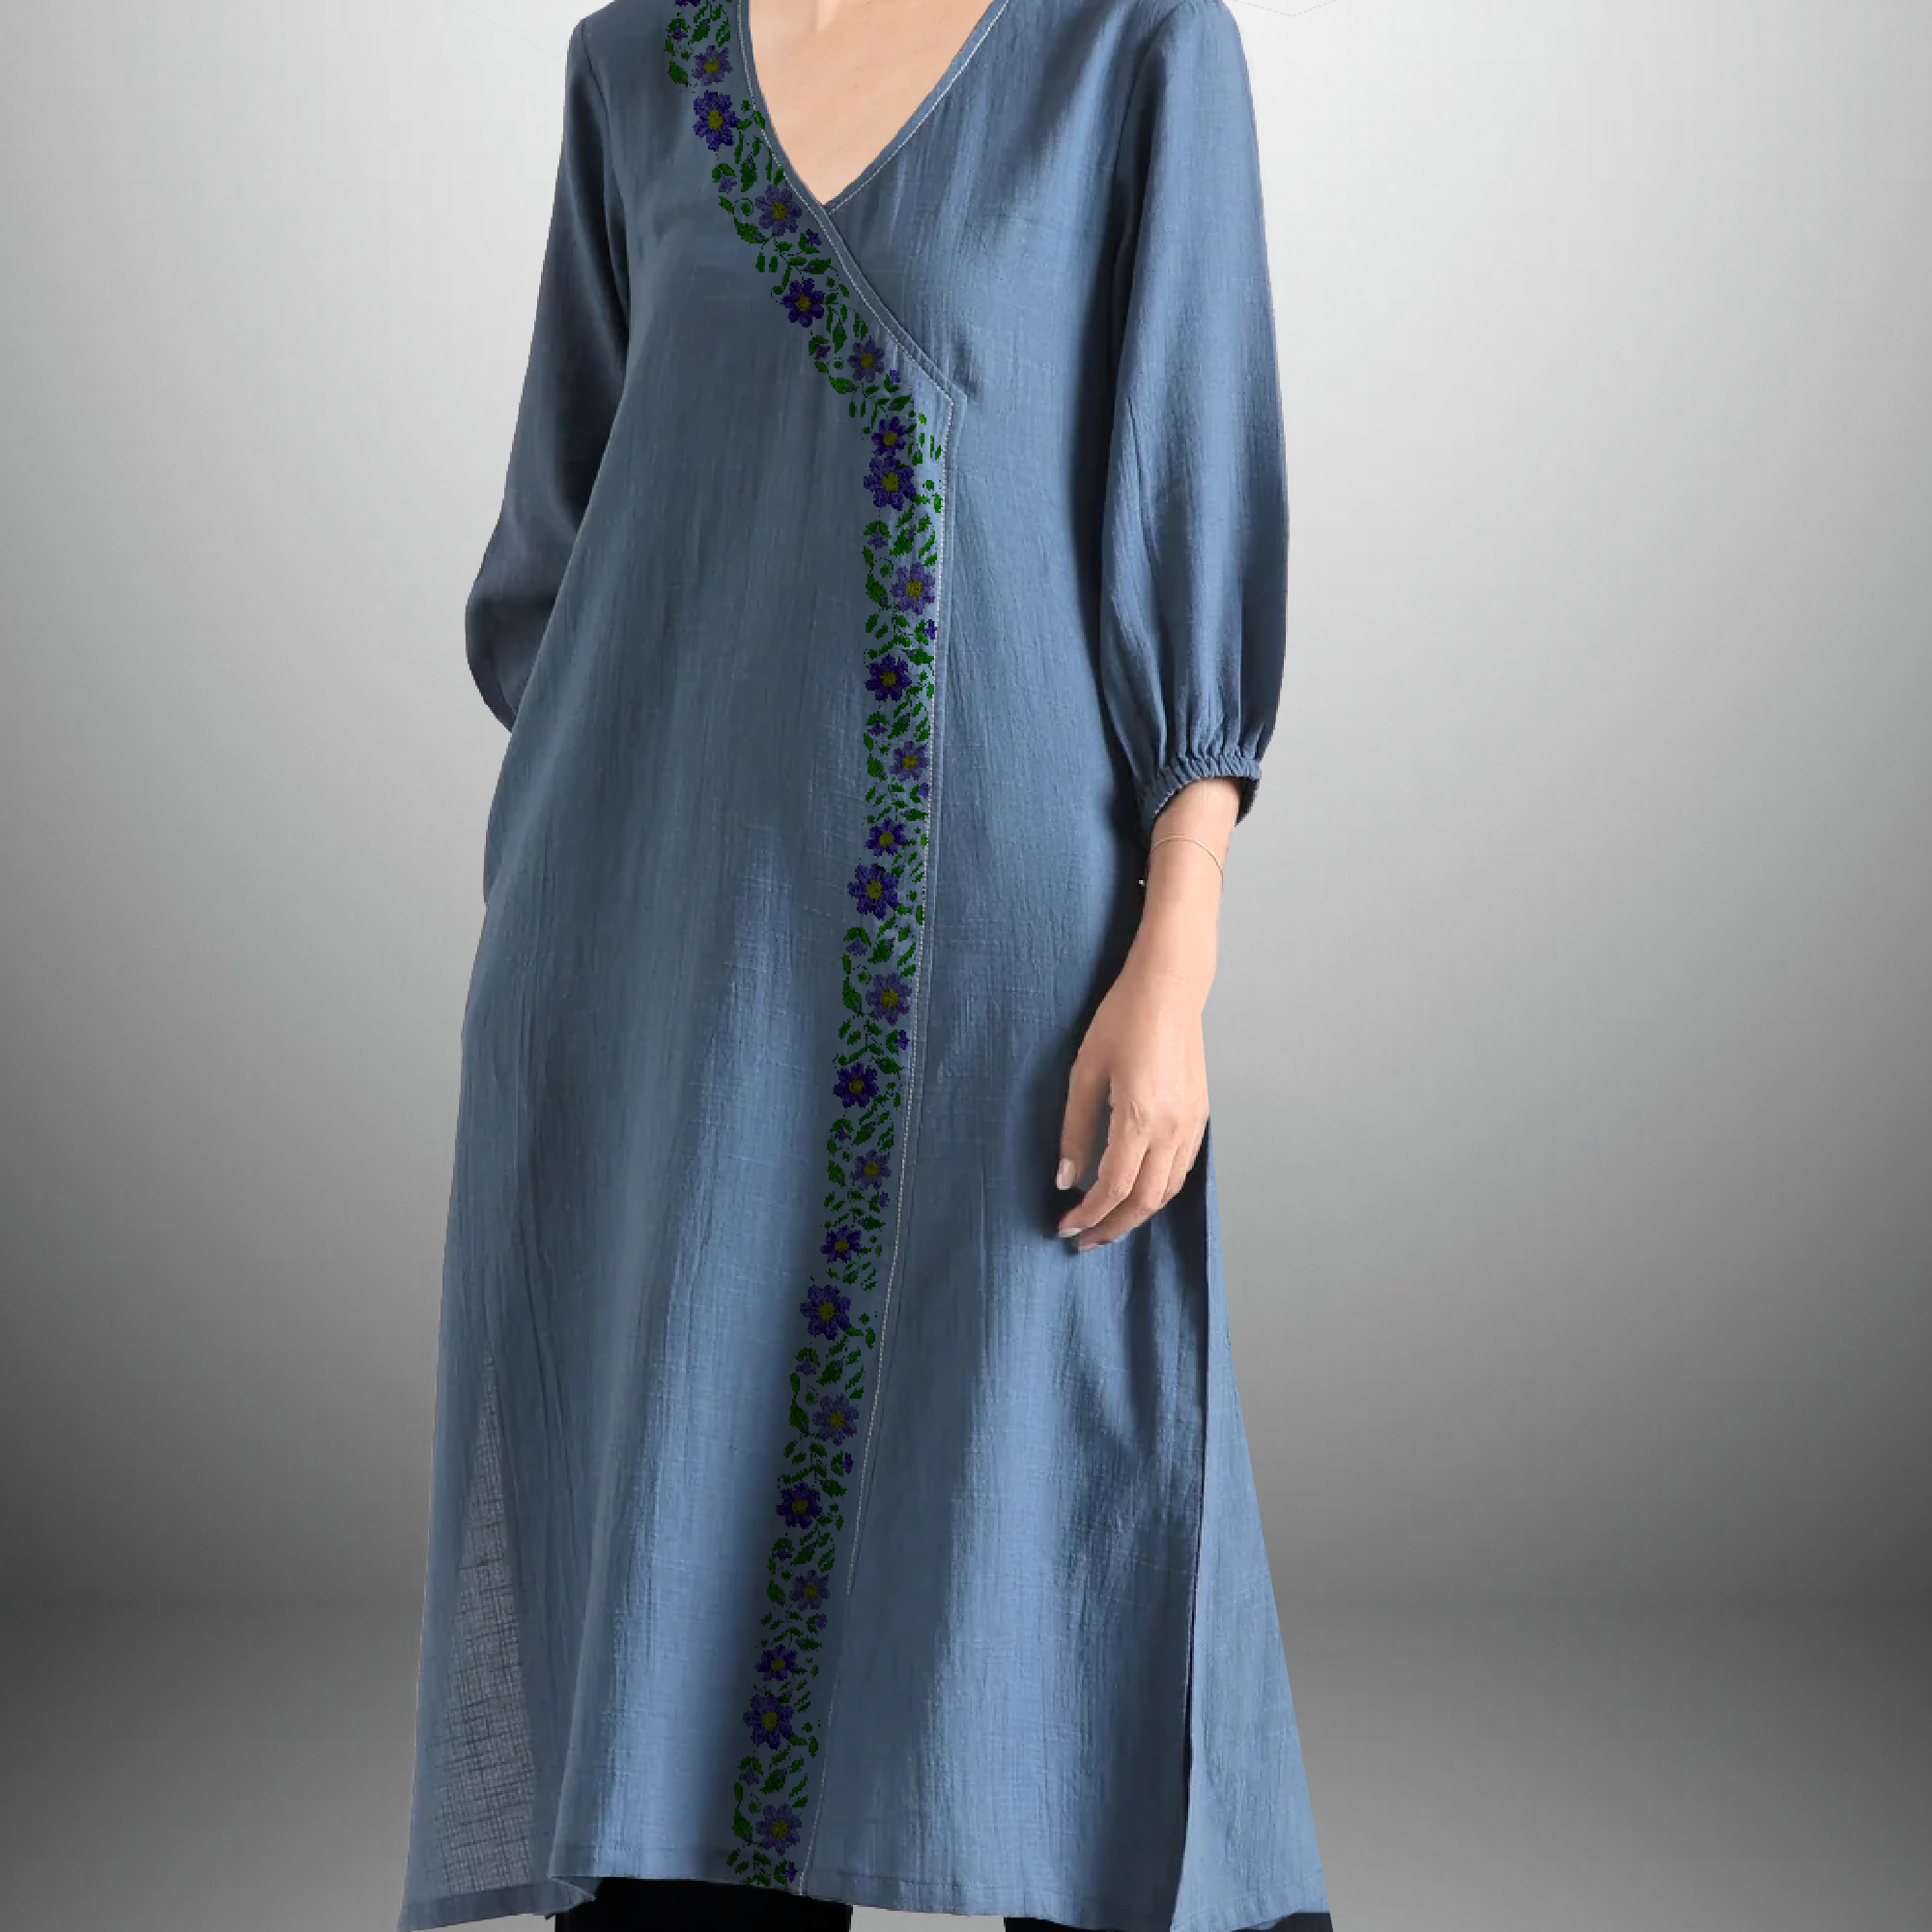 Women's Rayon Horizon blue color overlapped Kurti and black pant with floral embroidery -RWKS005